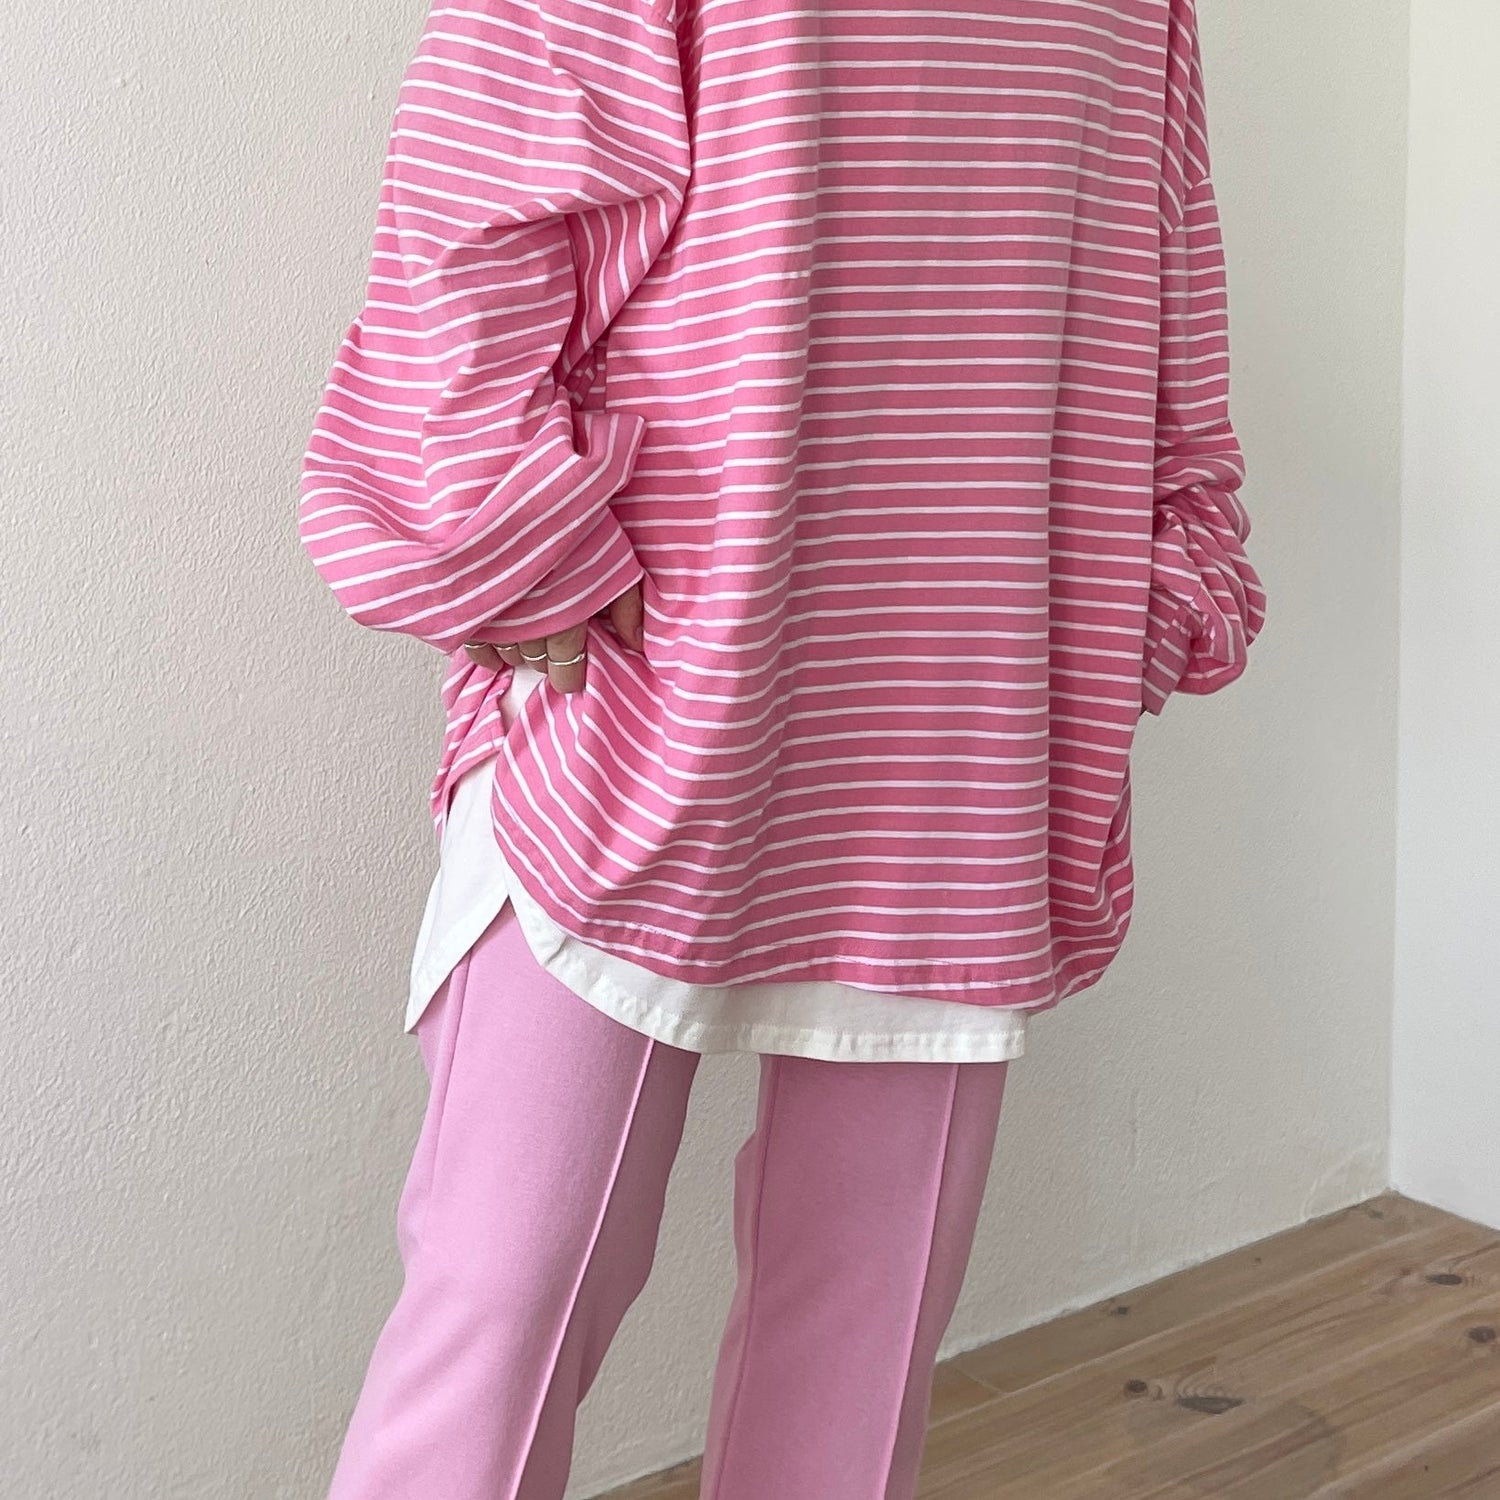 【SAMPLE】loose silhouette relax border tee / pink